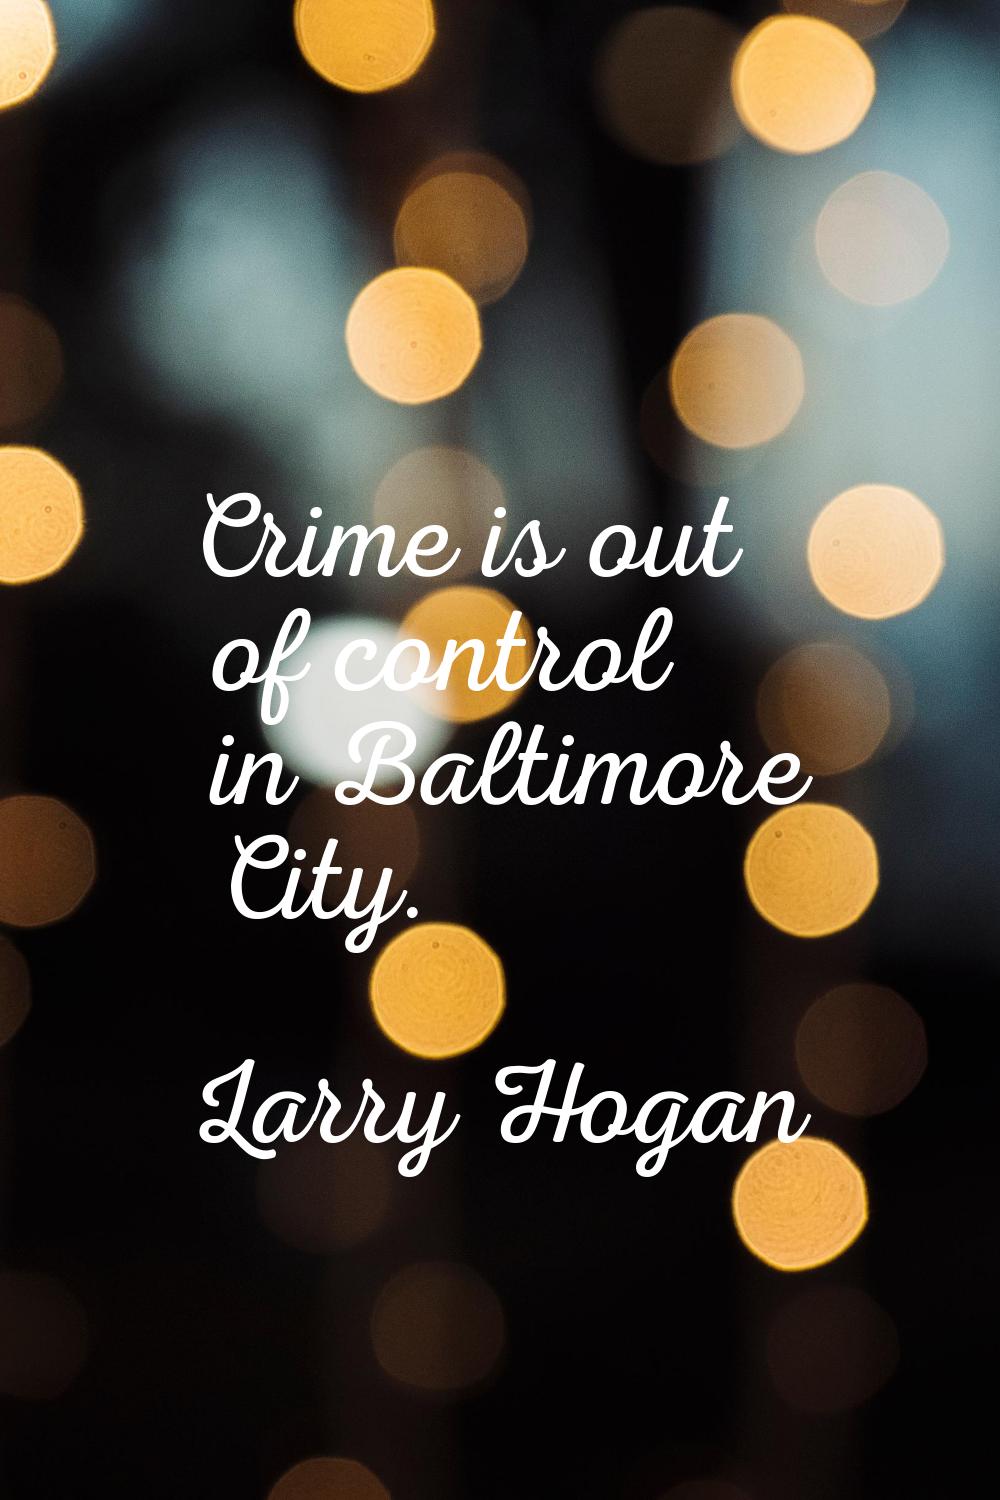 Crime is out of control in Baltimore City.